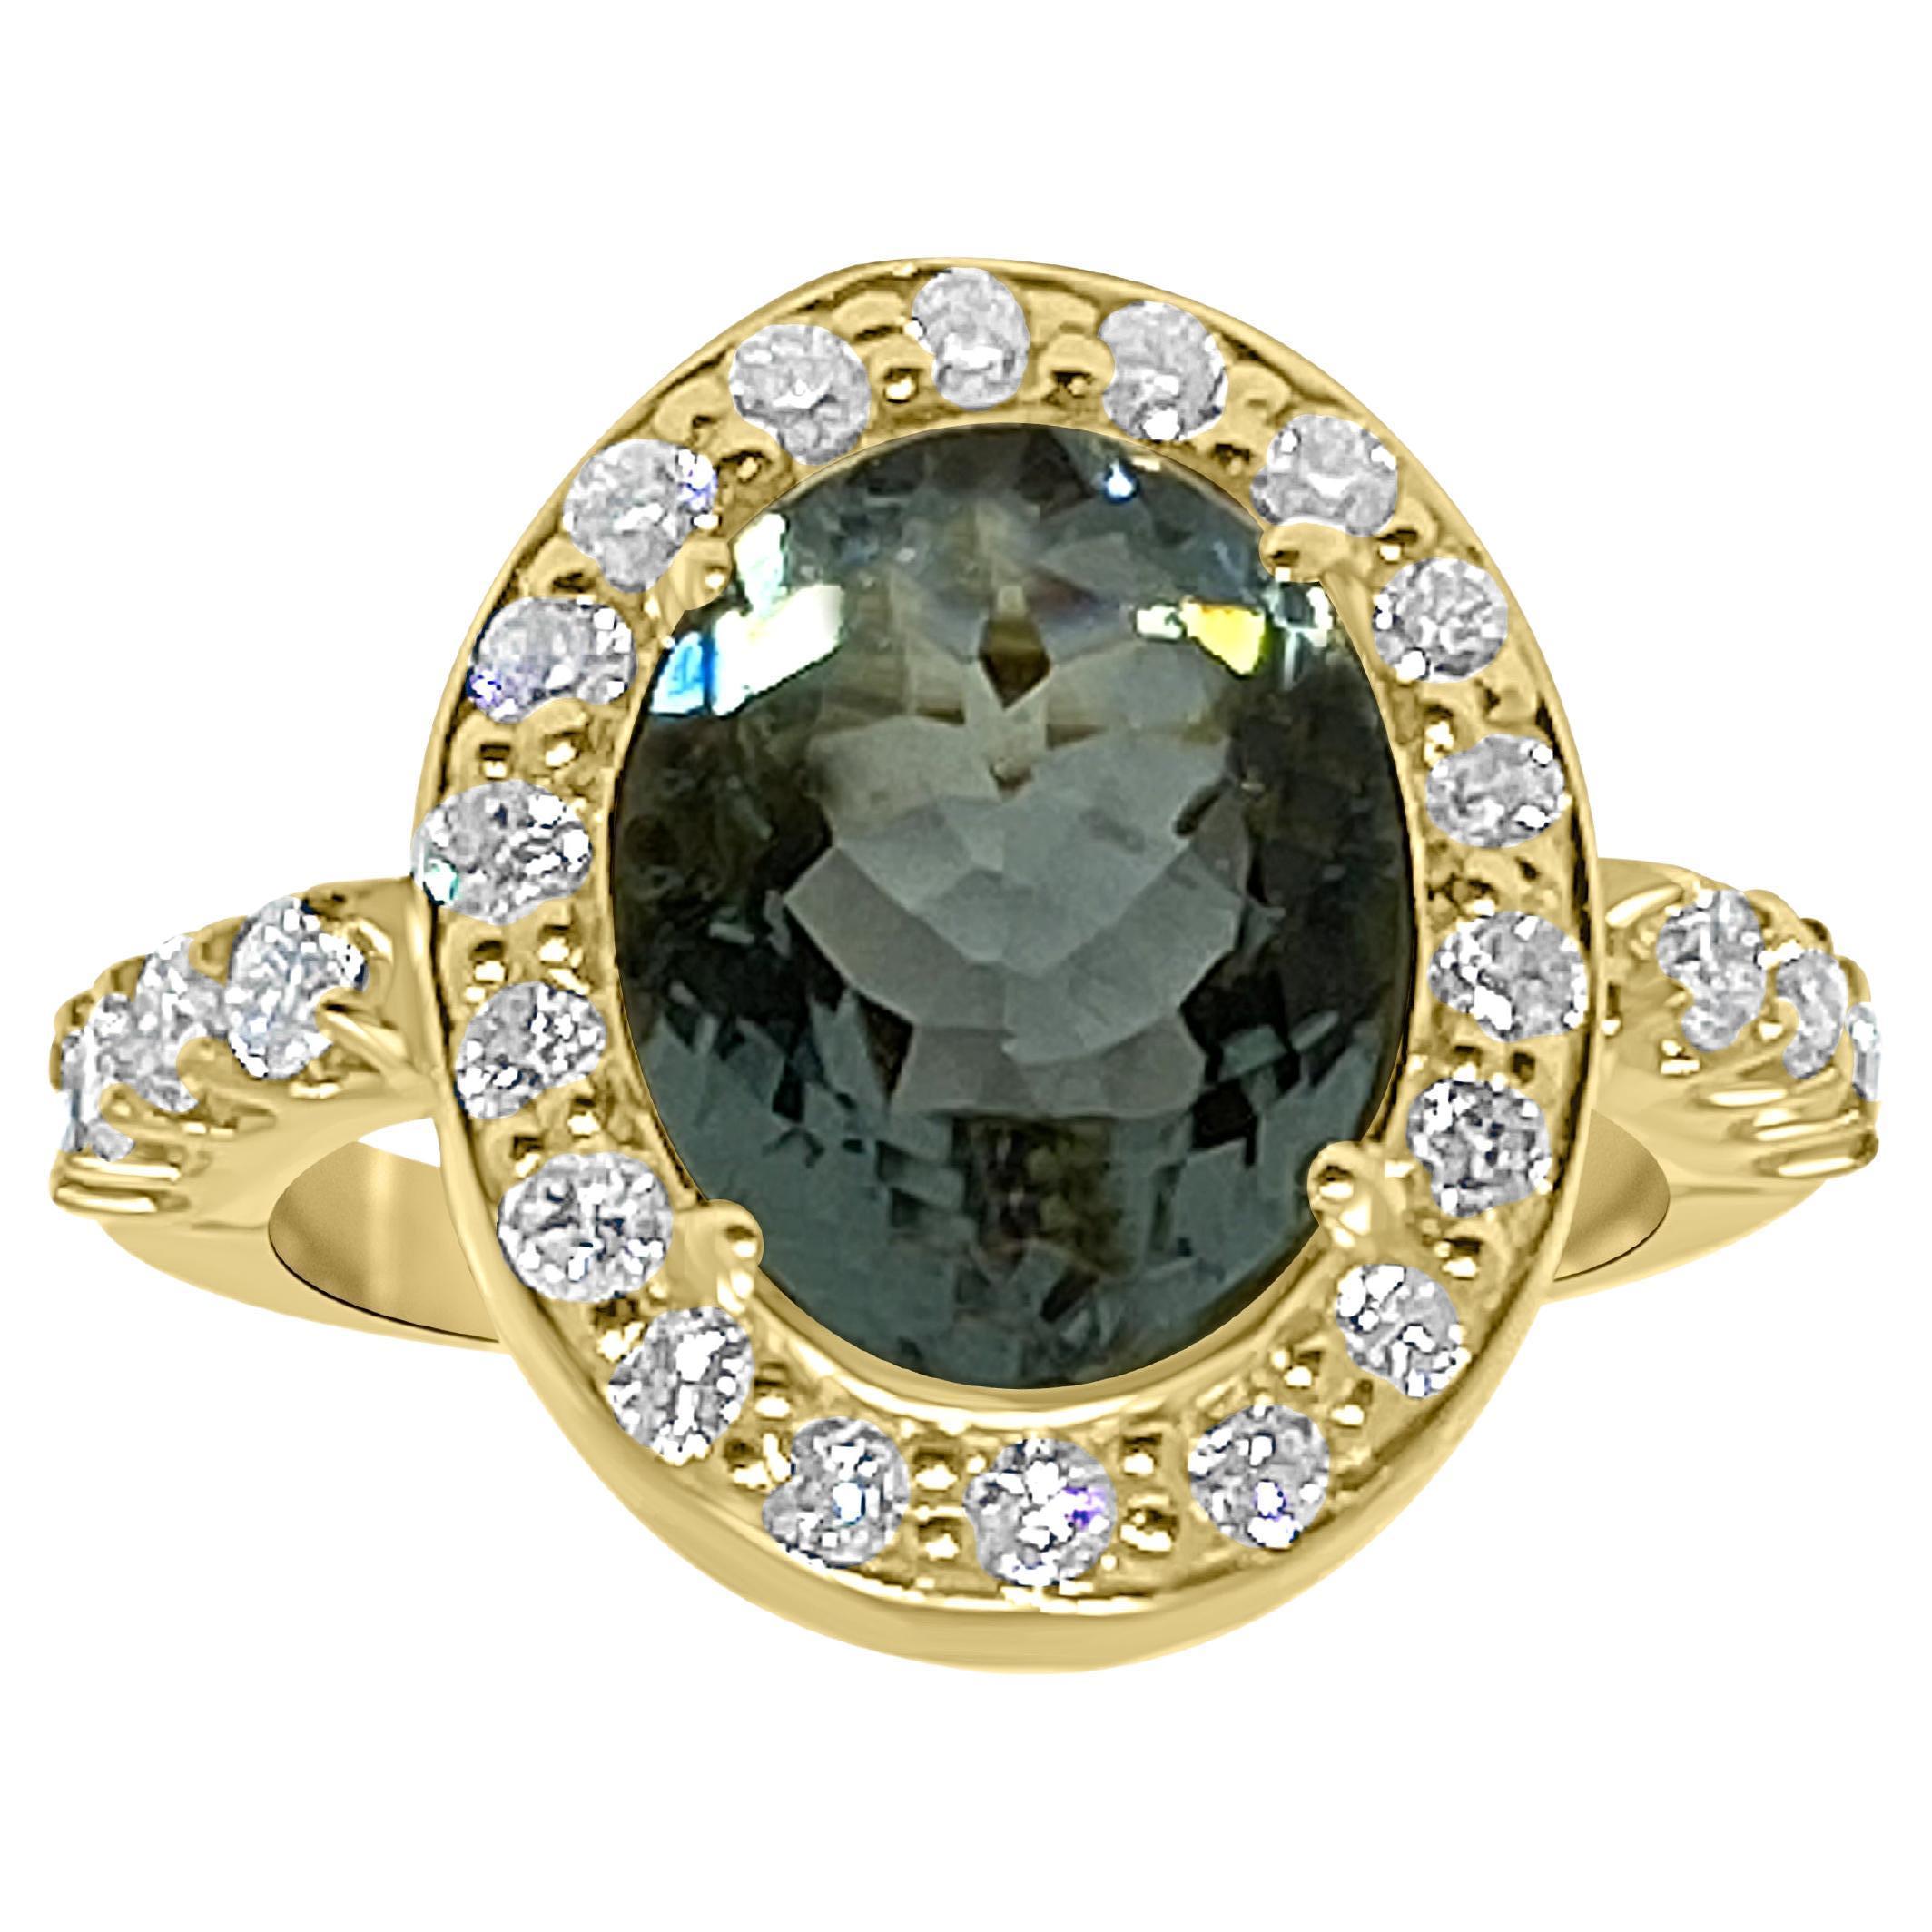 Bochic Oval shape Tiel/Blue Tourmaline and Diamond Cocktail Ring.
Center Oval shape Tourmaline 5.04 Carat
White Diamond cluster and side diamonds 0.87 Carat 
18 K Yellow gold 
29 Grams 
Elegant, Timeless and Chic 
Signed Bochic 
Bochic black lather